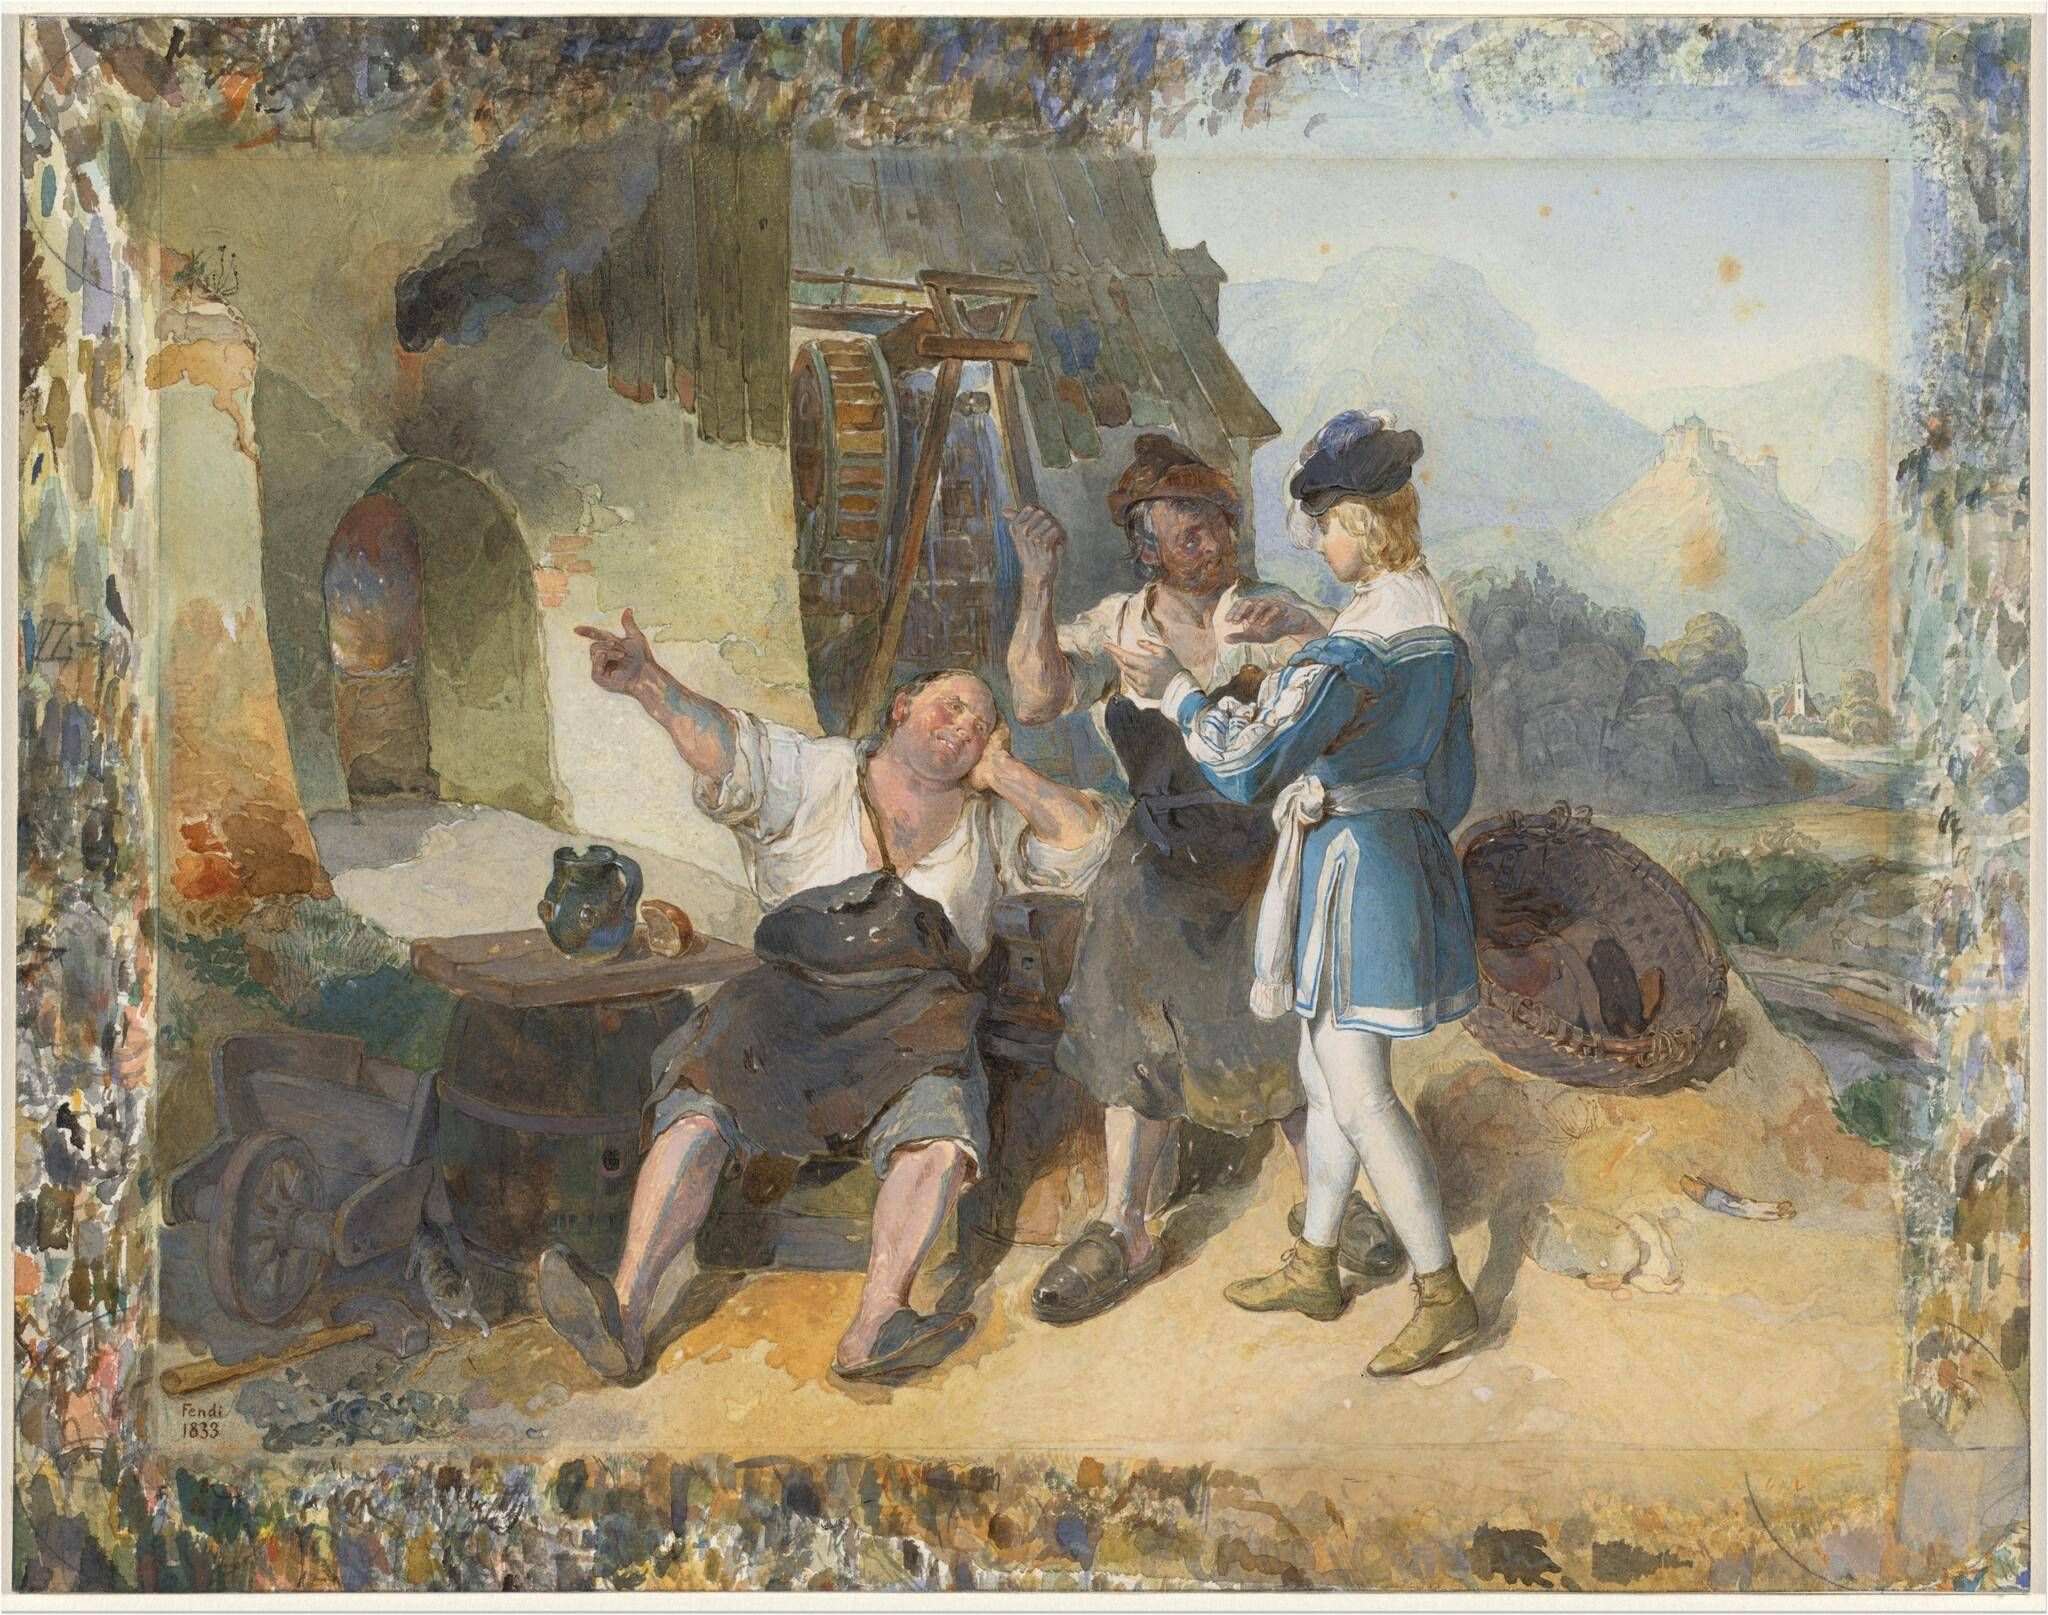 Fridolin and Two Workmen by the Forge